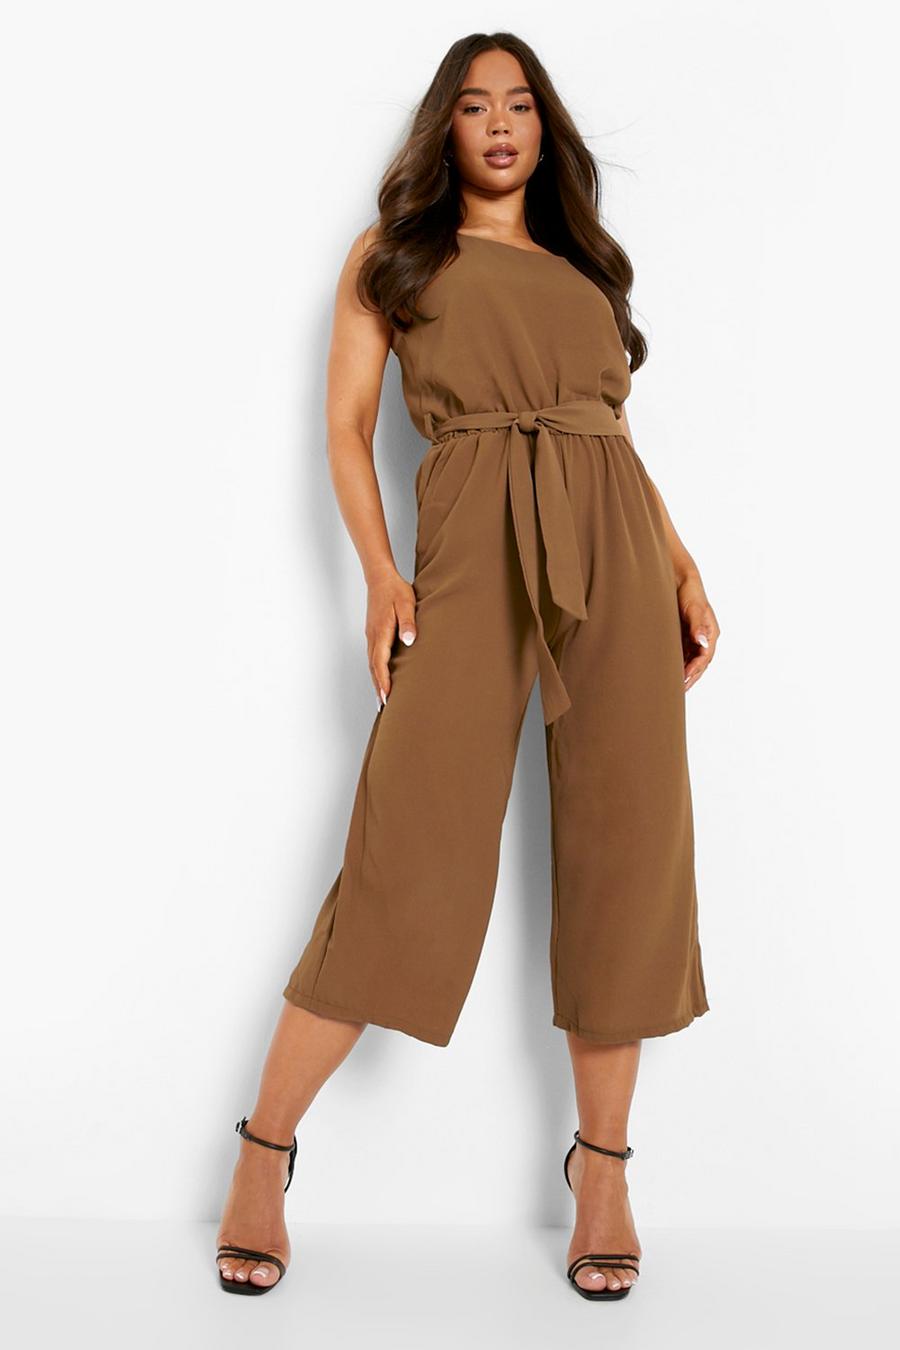 Tobacco brown Woven Sleeveless Culotte Jumpsuit